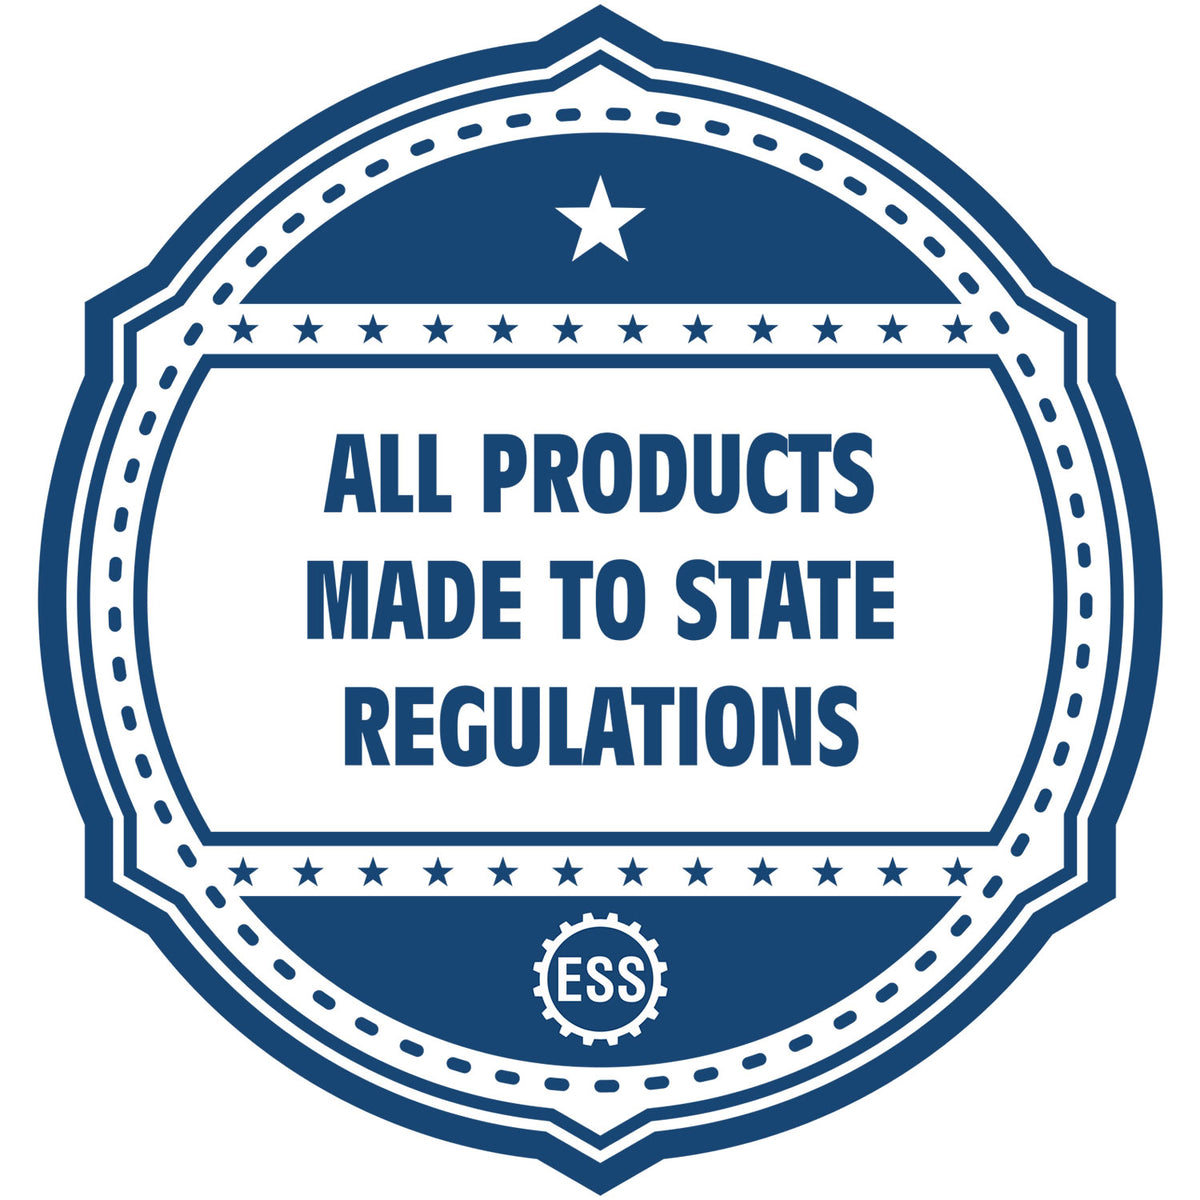 An icon or badge element for the Slim Pre-Inked Texas Land Surveyor Seal Stamp showing that this product is made in compliance with state regulations.